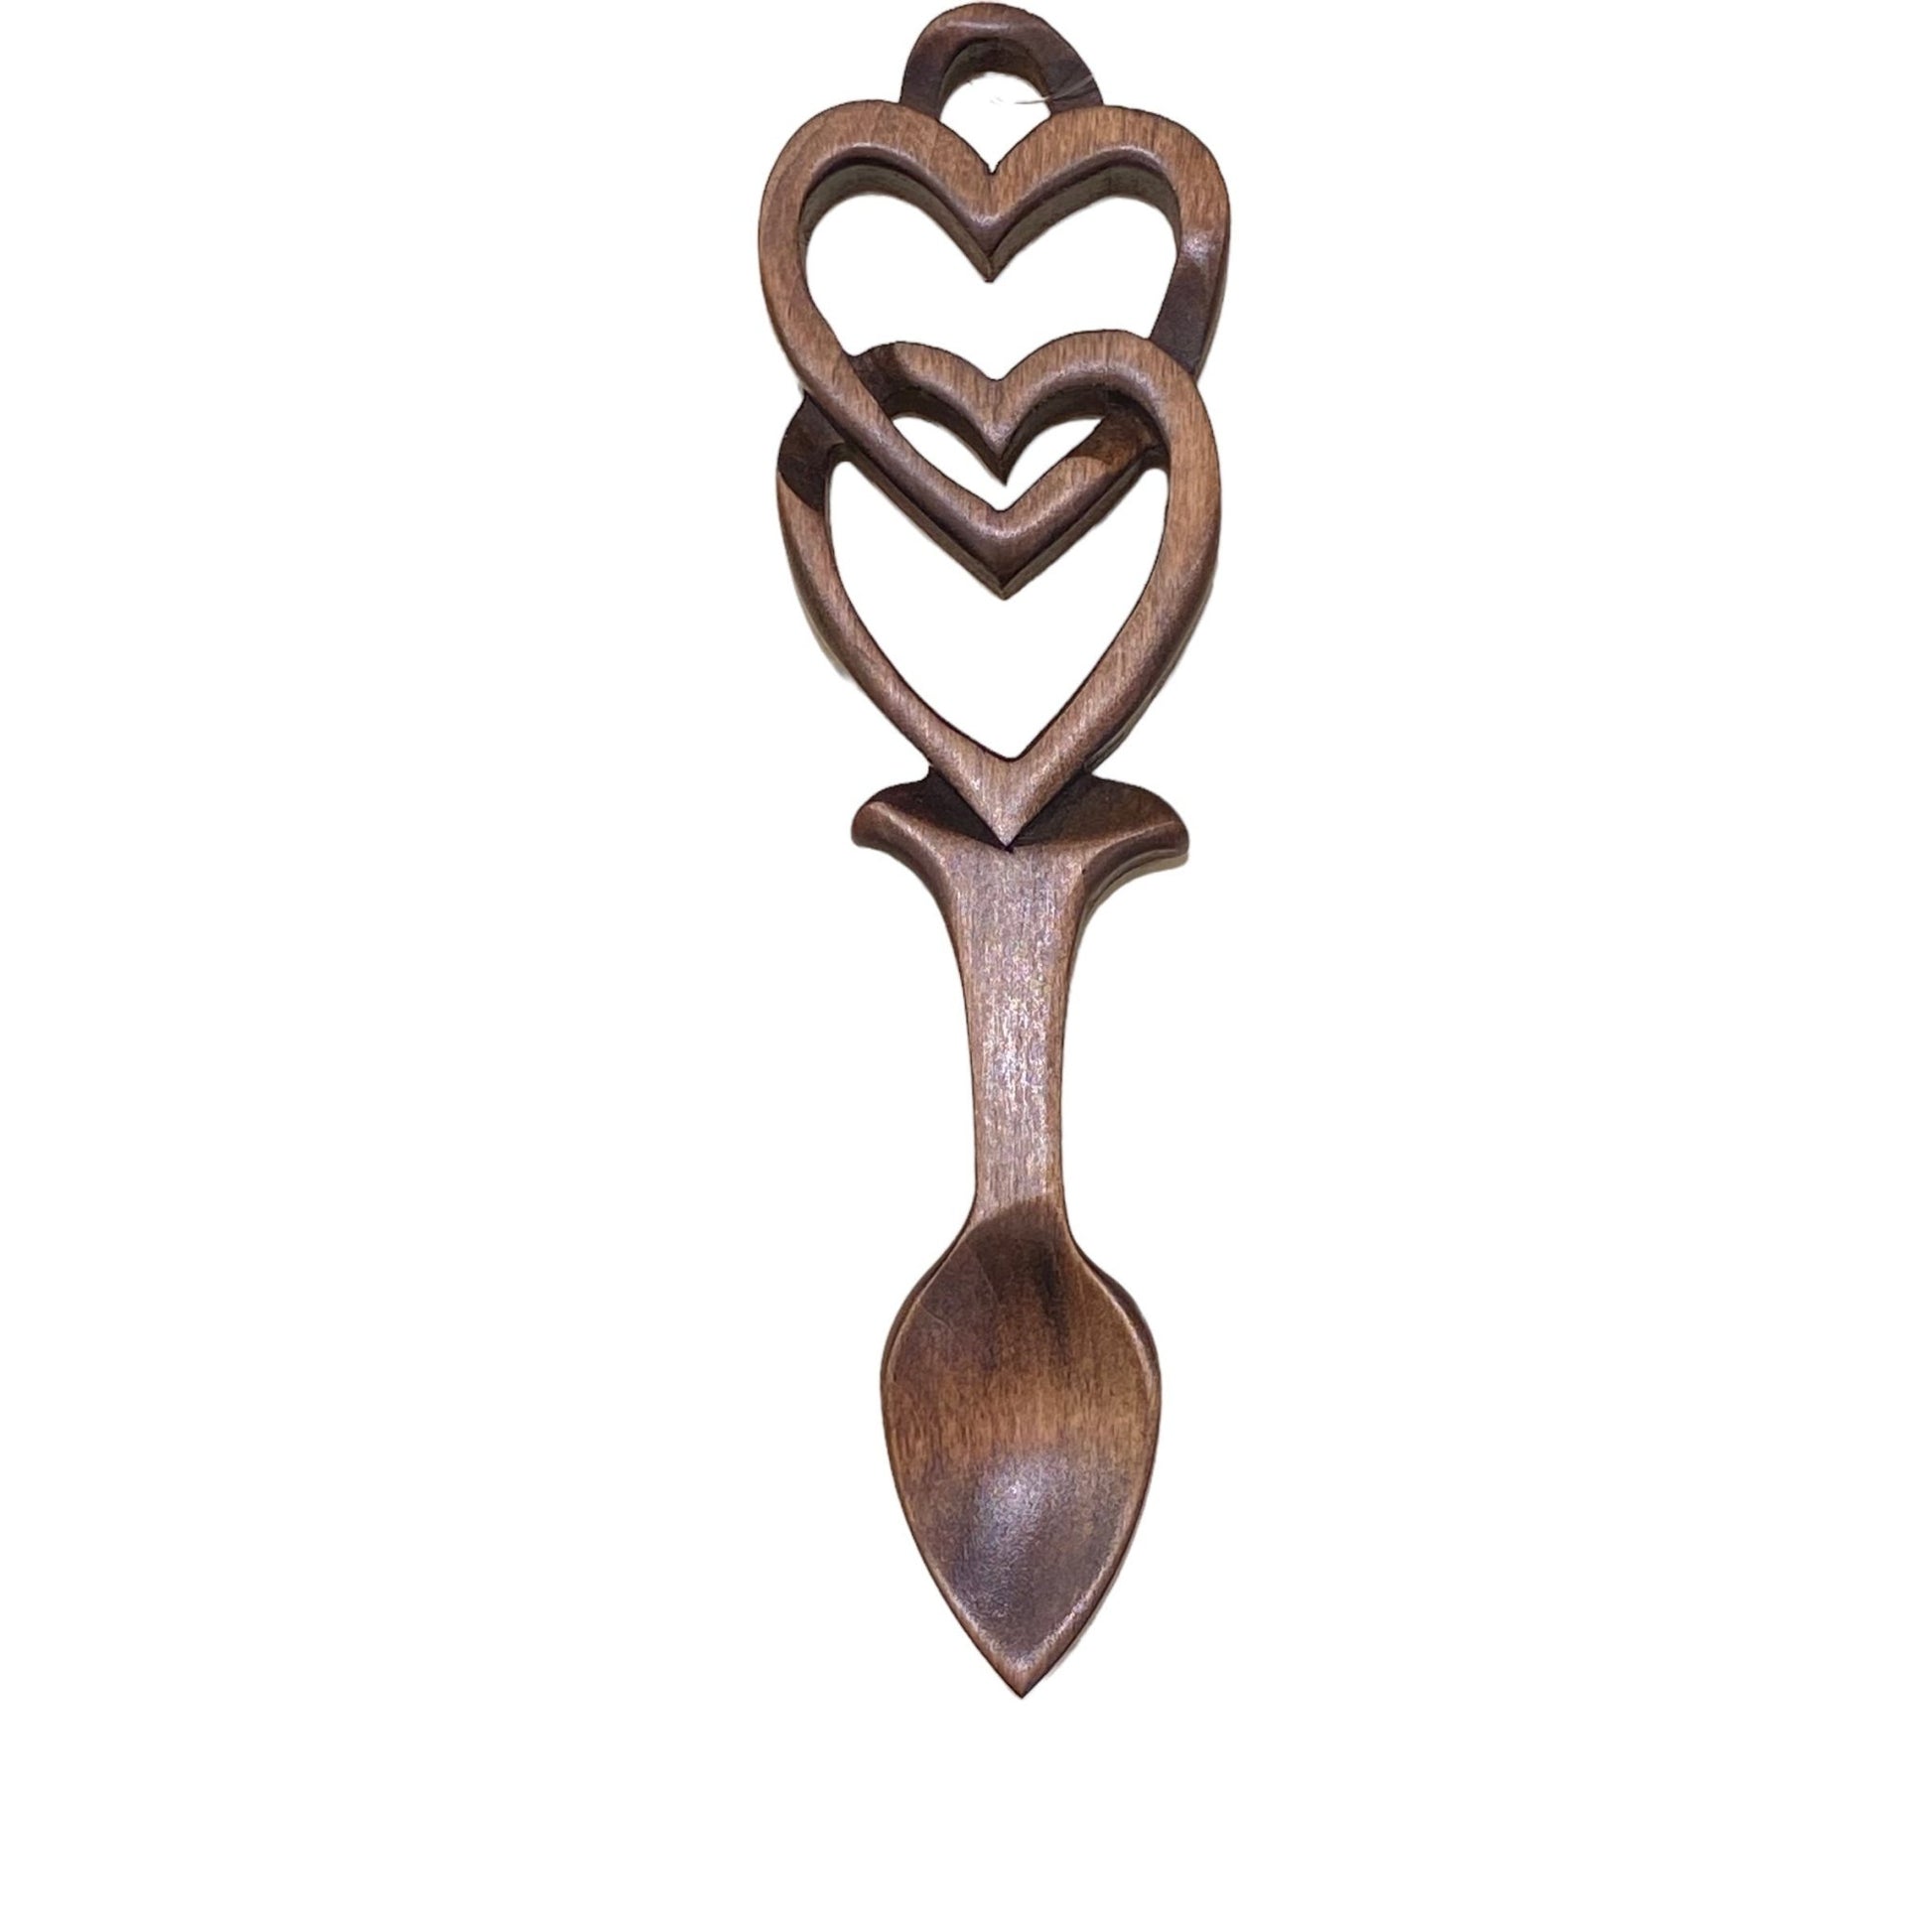 Welsh Love Spoon Entwined Forever - Bumble Living